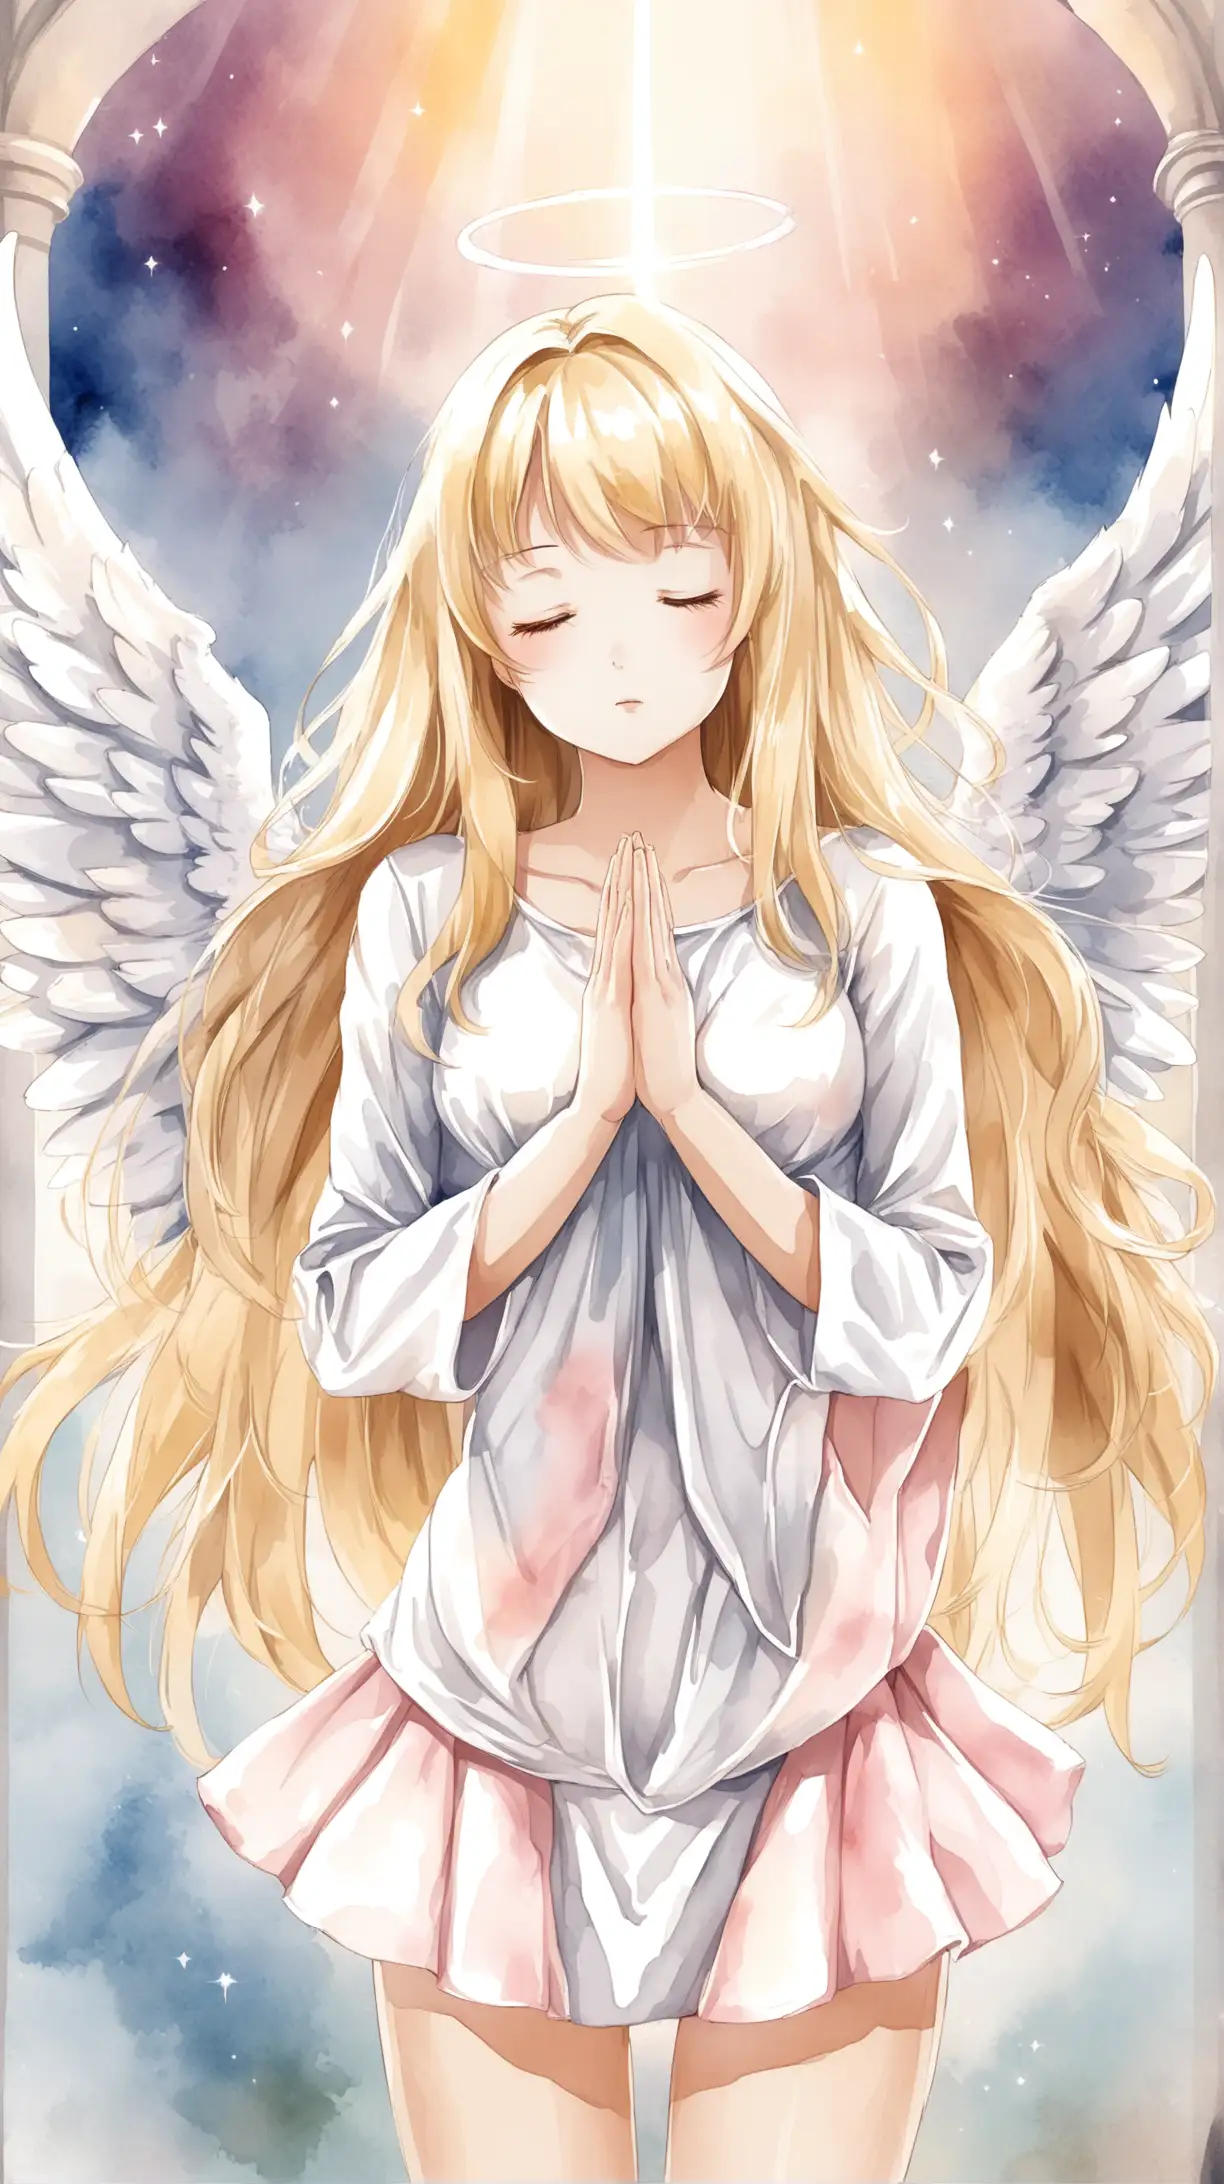 Draw a sexy women , anime watercolor style , praying to god, light pink angel costume, angel wing , short skirt, blonde long hair, fantastic background, medium shot.